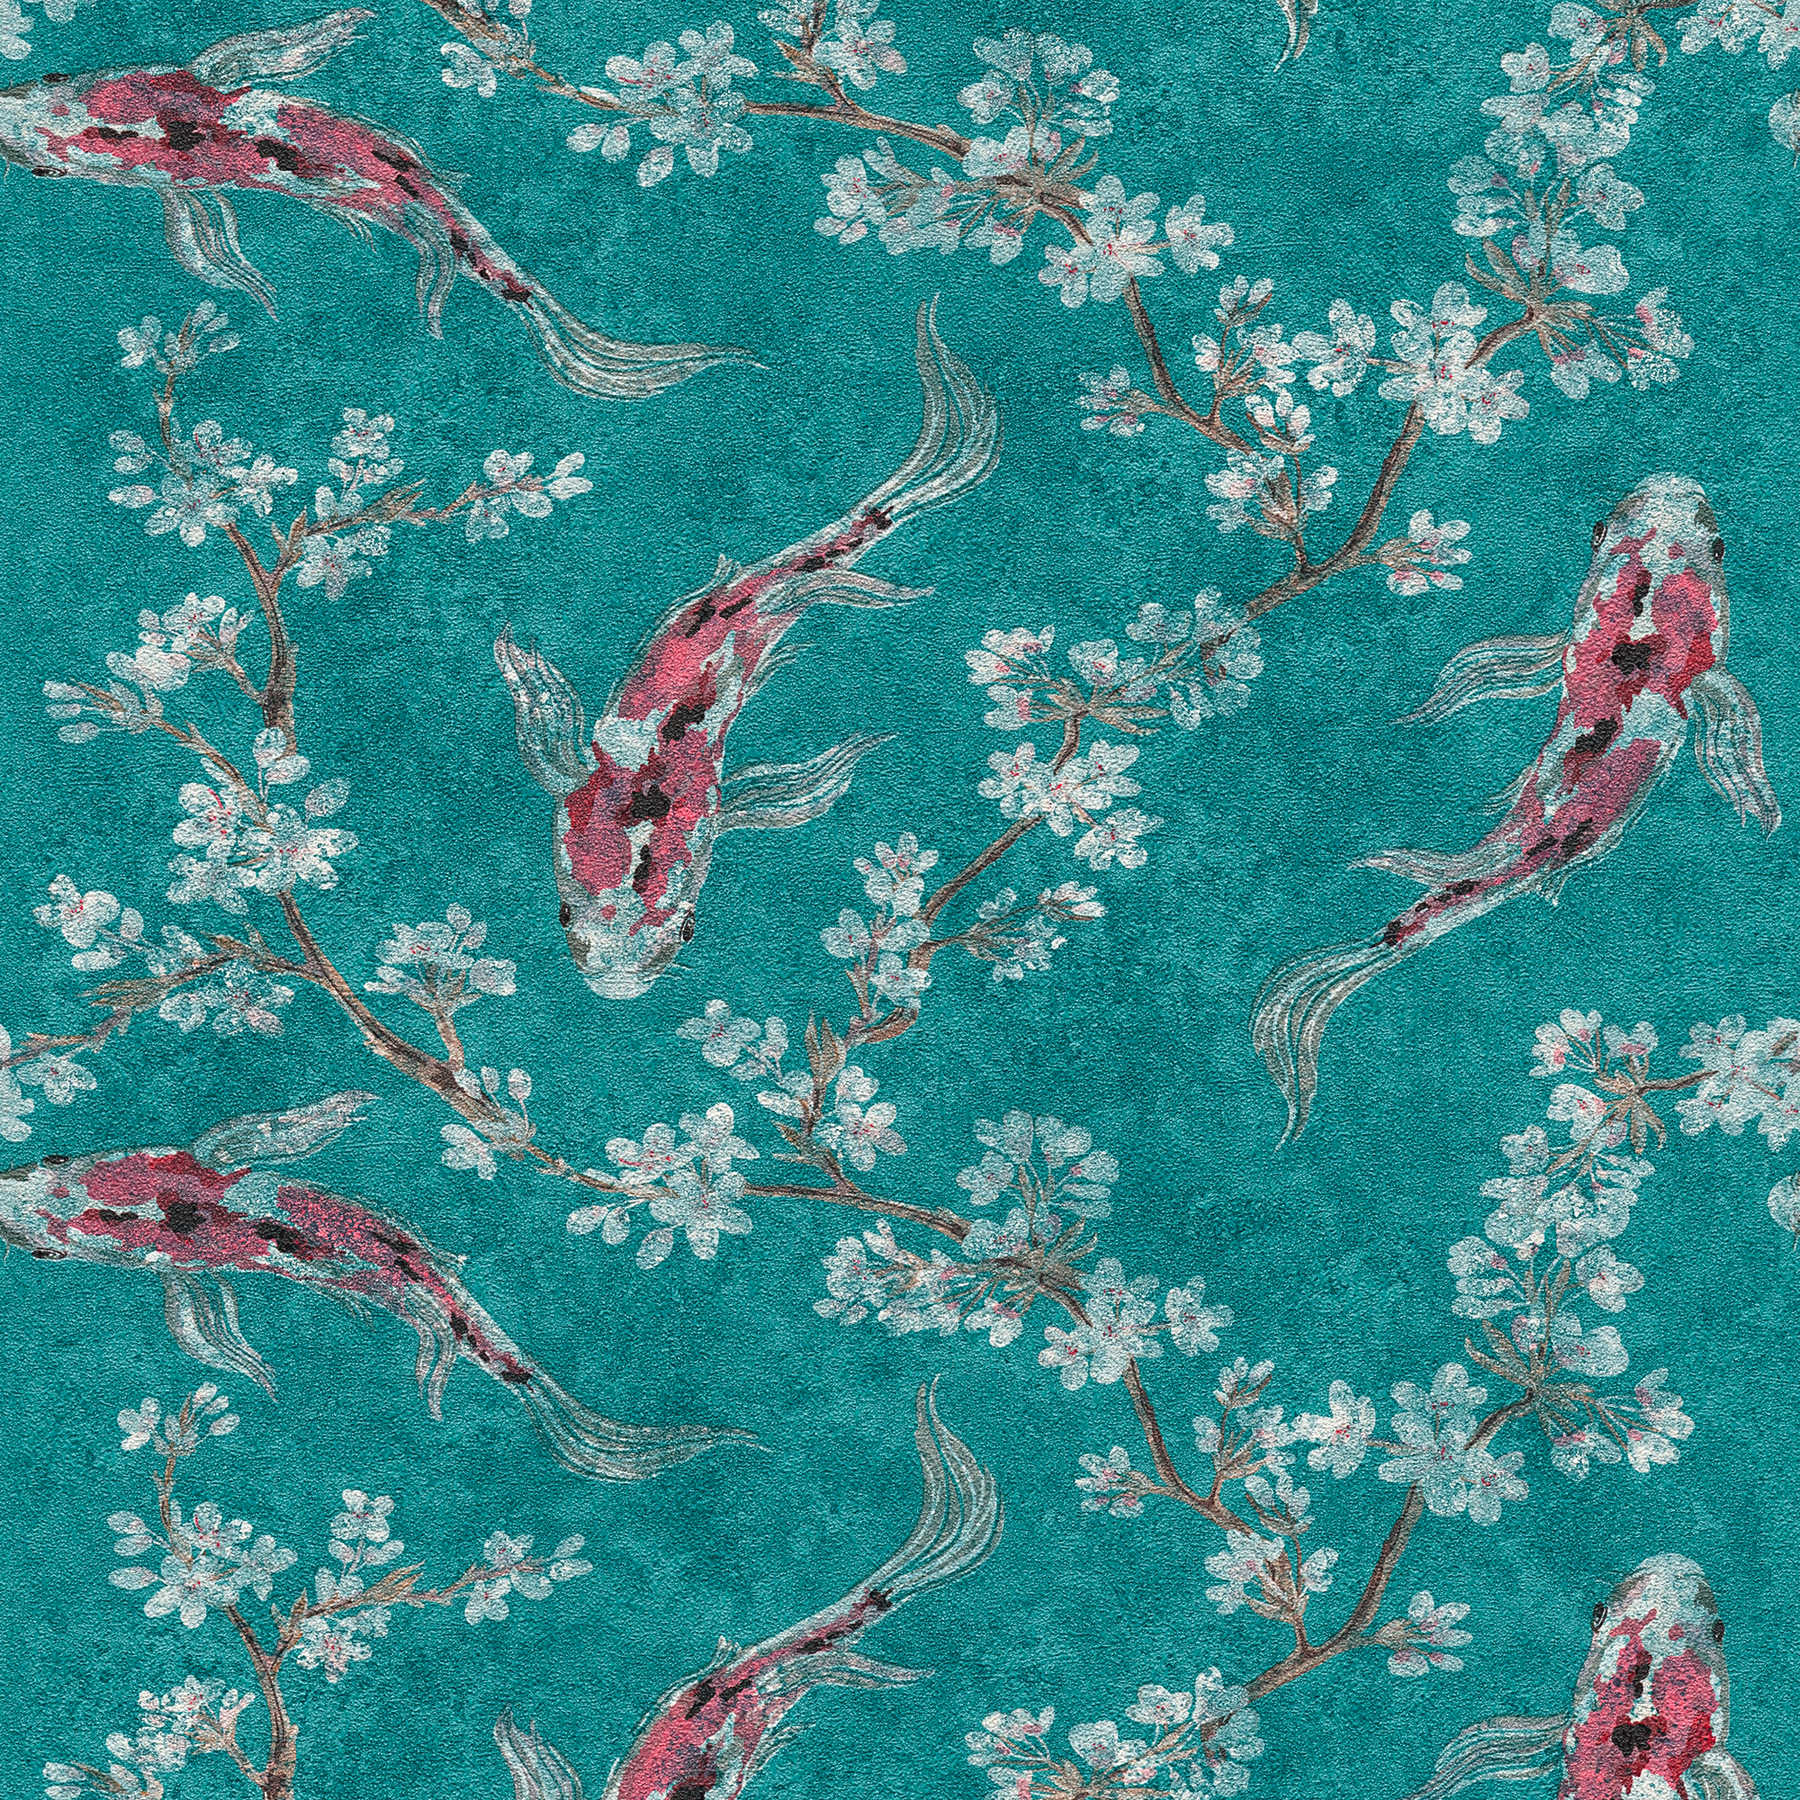         Non-woven wallpaper with koi pattern in Asian style - blue, green, red
    